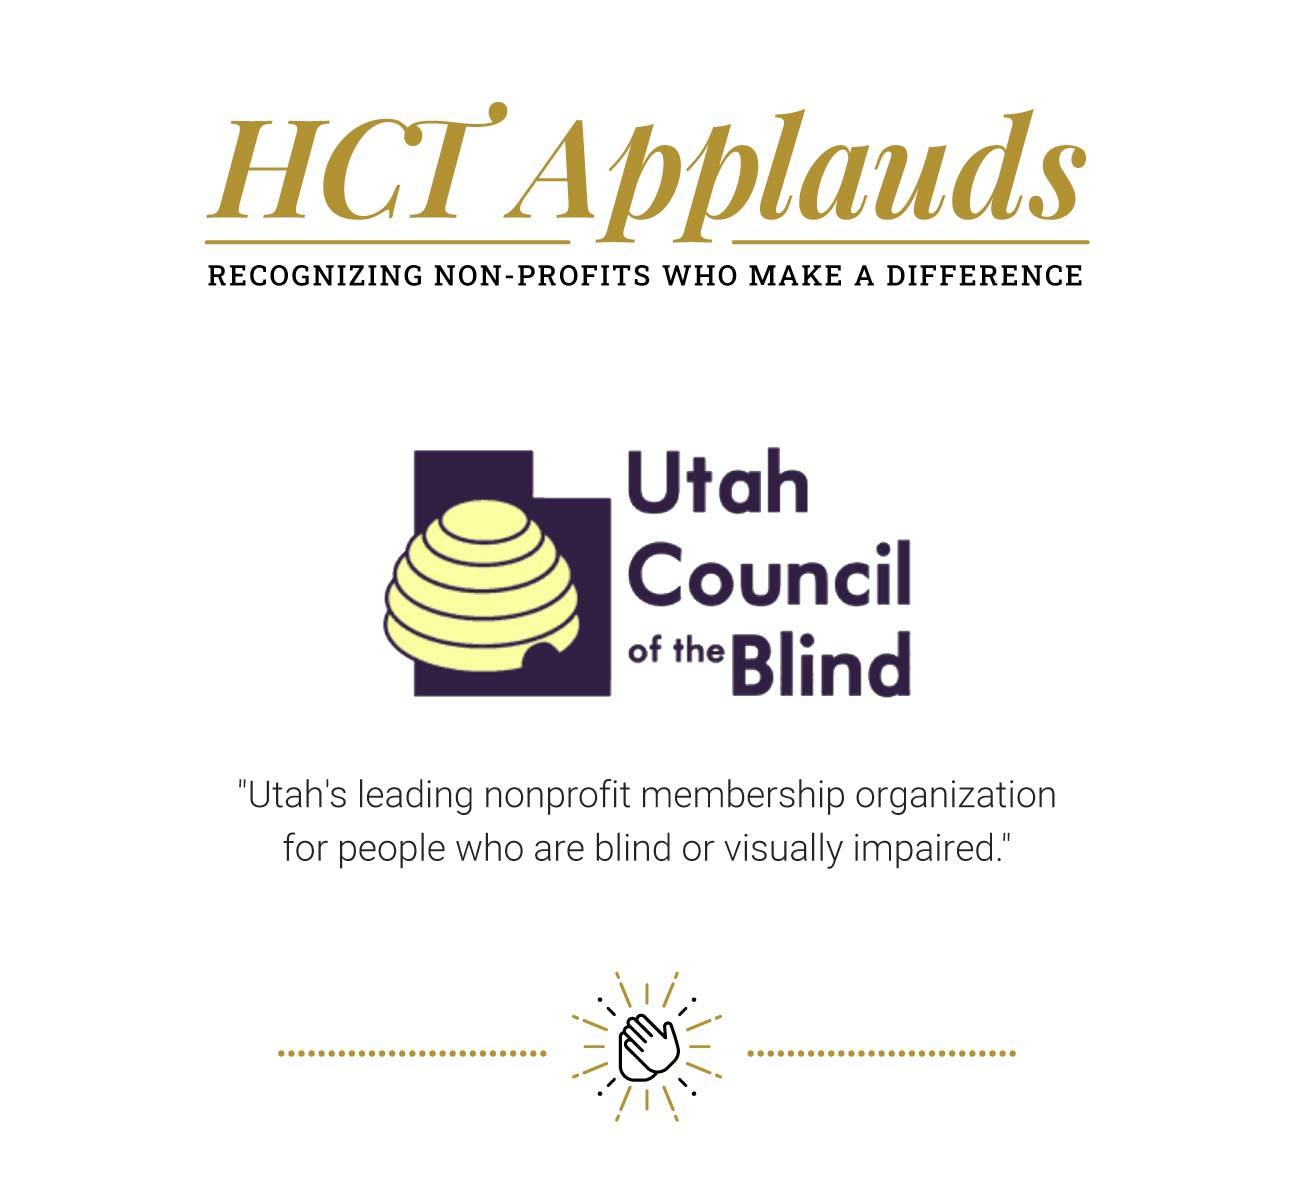 1223 Applauds UT Council of the Blind